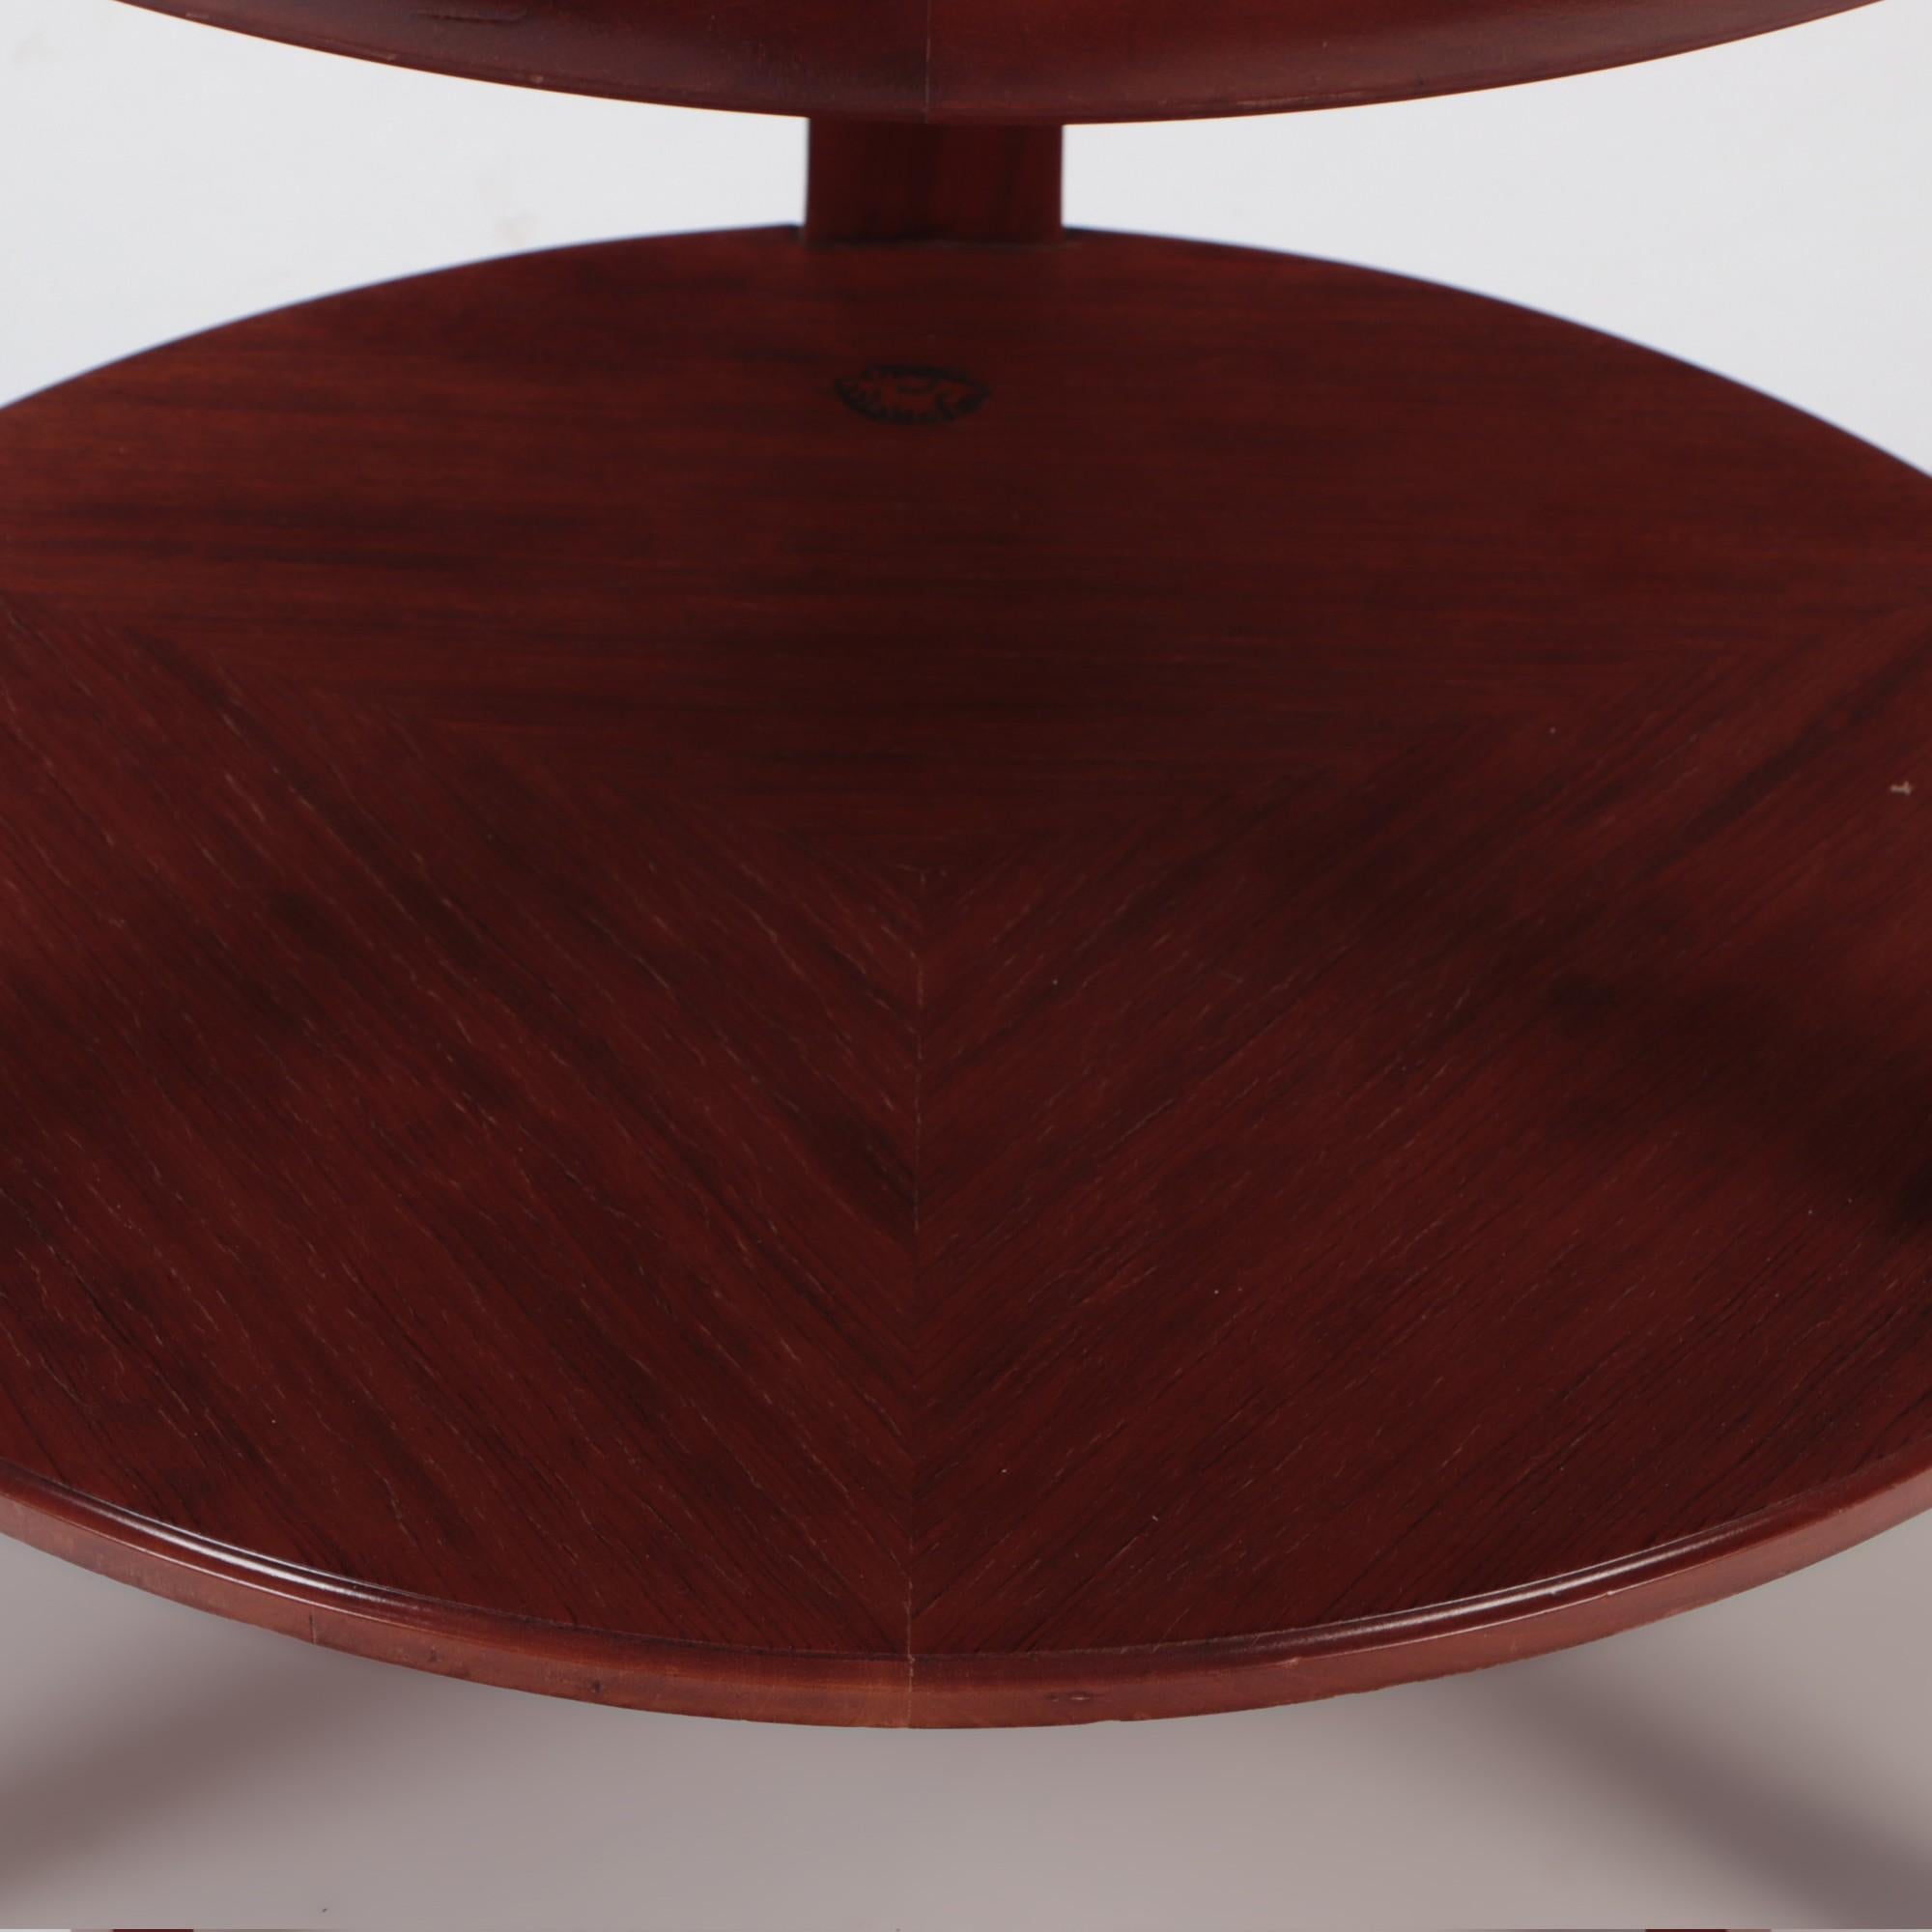 Mid-20th Century French Art Deco Mahogany Side Table by Louis Majorelle, Signed, Circa 1930 For Sale